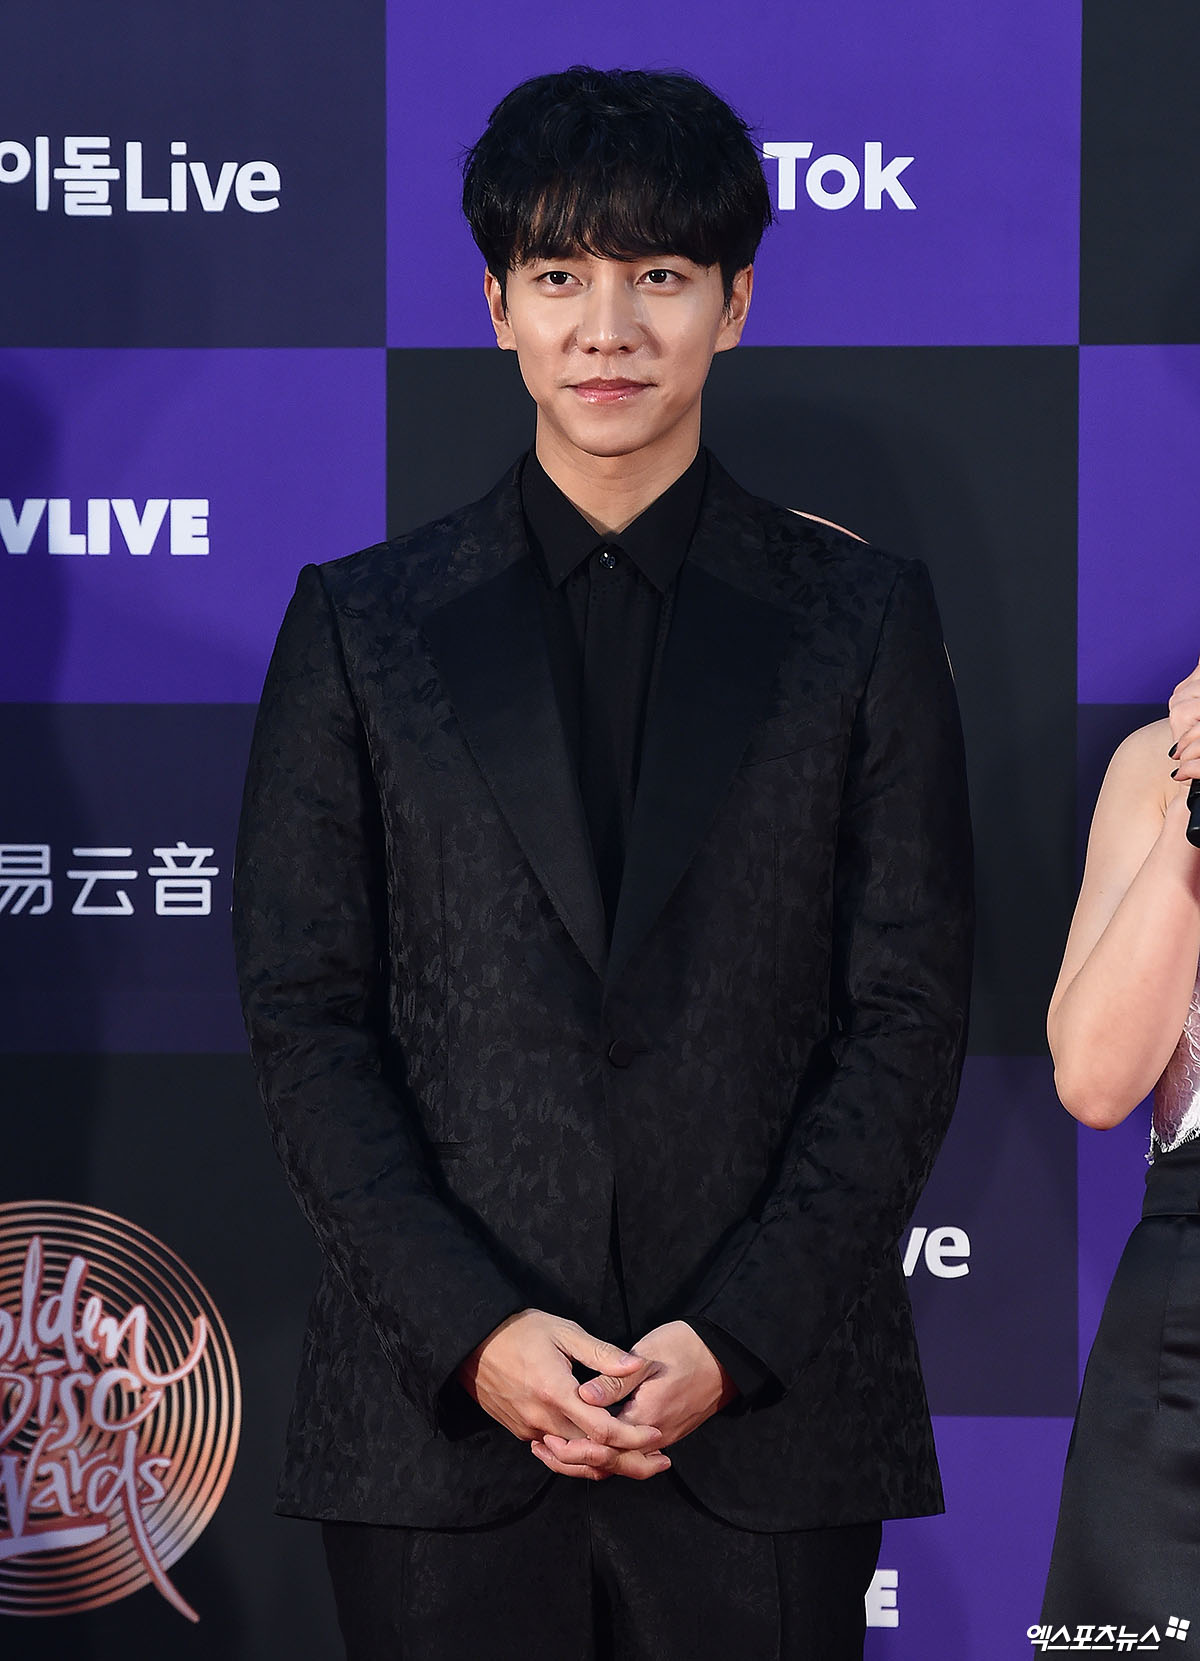 Actor Lee Seung-gi, who attended the red carpet event ahead of the awards ceremony of the 34th Golden Disk Awards with TikTalk at Gocheok Sky Dome in Seoul Guro District on the afternoon of the 5th, has photo time.